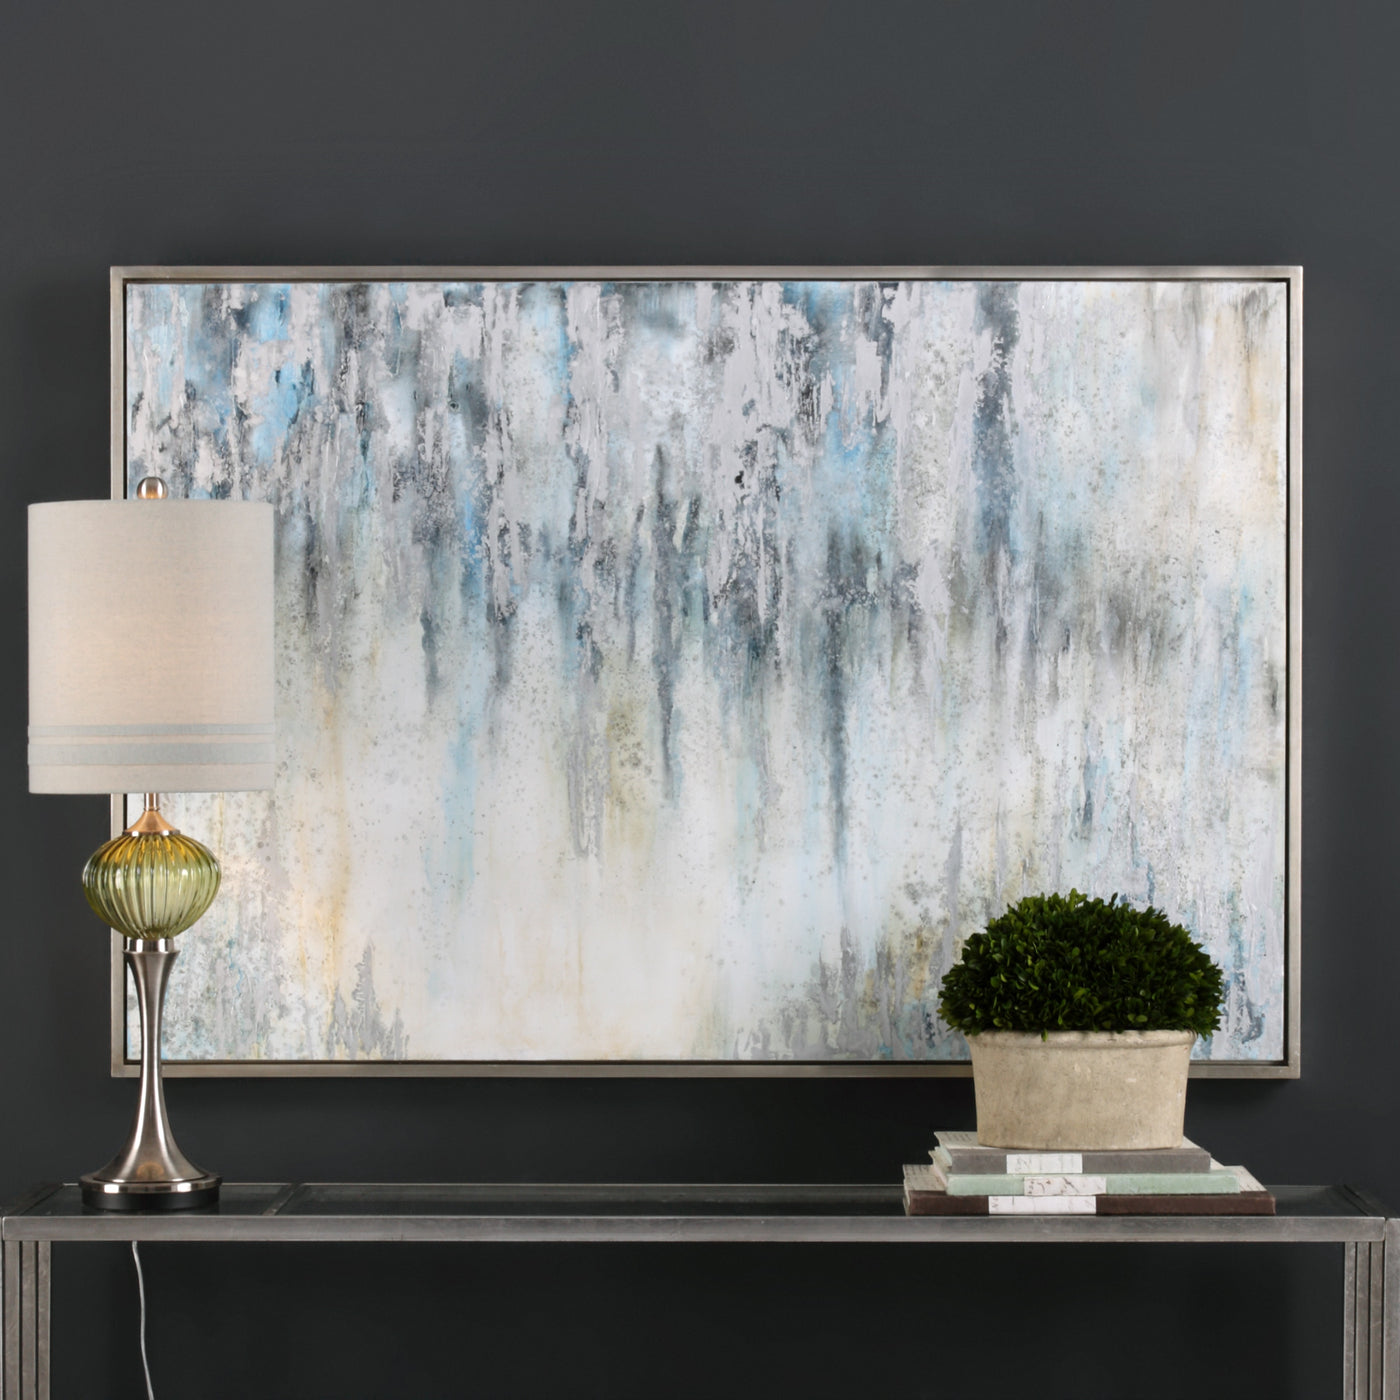 Modern In Design, This Hand Painted Abstract On Canvas Projects An Expressive, Yet Refined Quality. Cool Blue, Gray, And S...